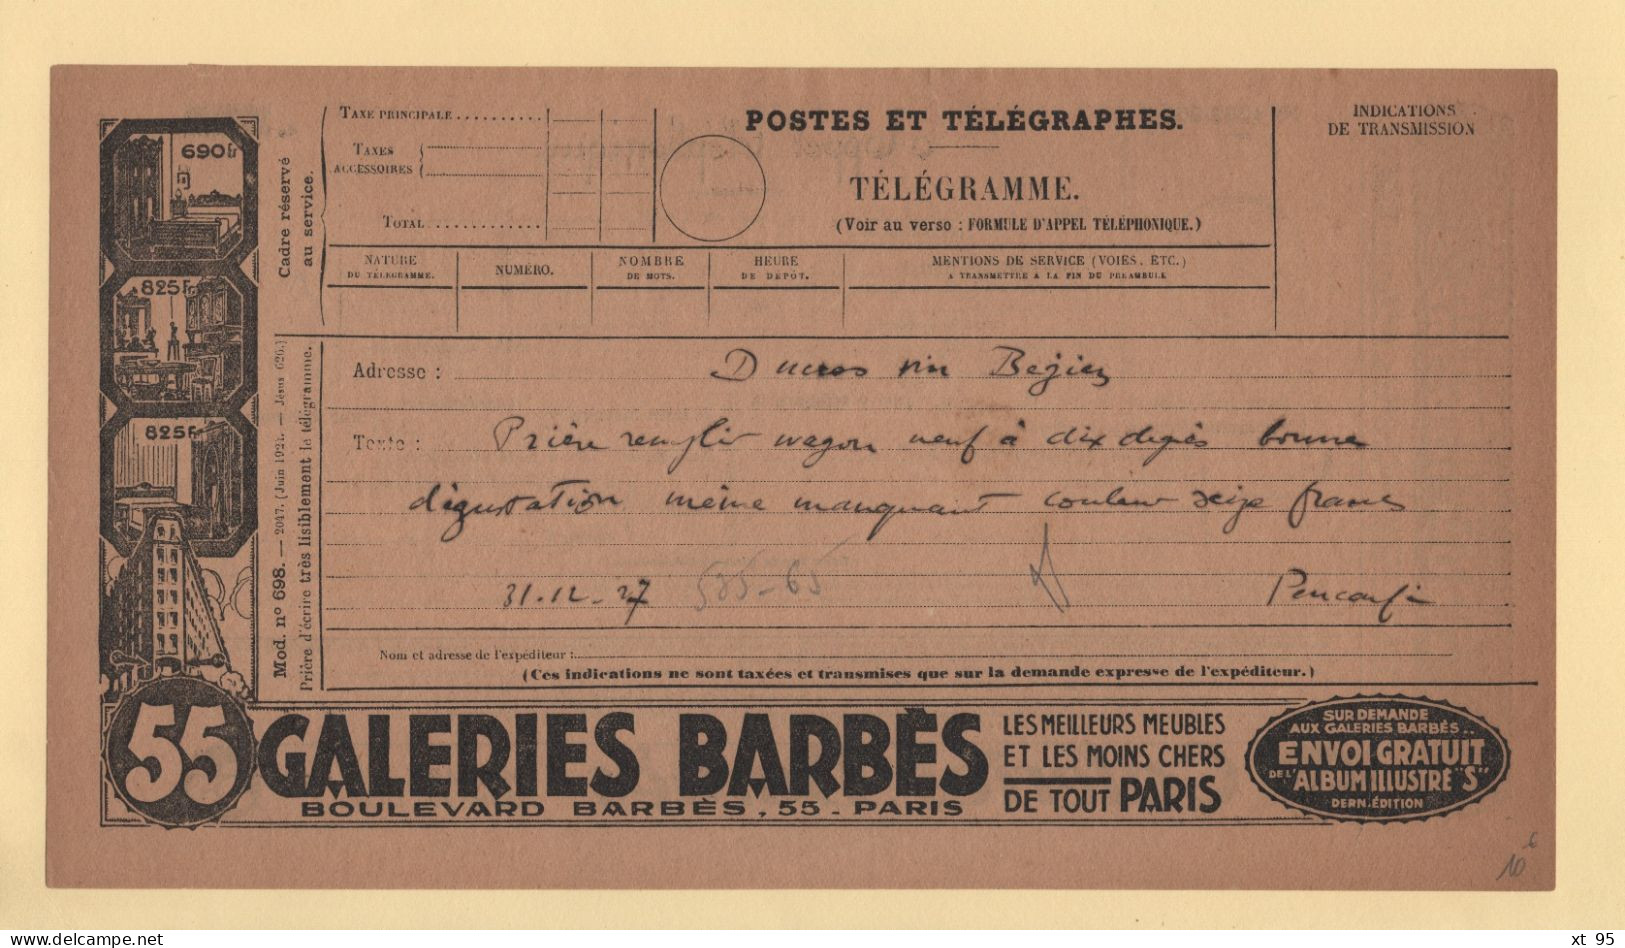 Telegramme Illustre - Galeries Barbes - 1927 - Beziers - Telegraph And Telephone